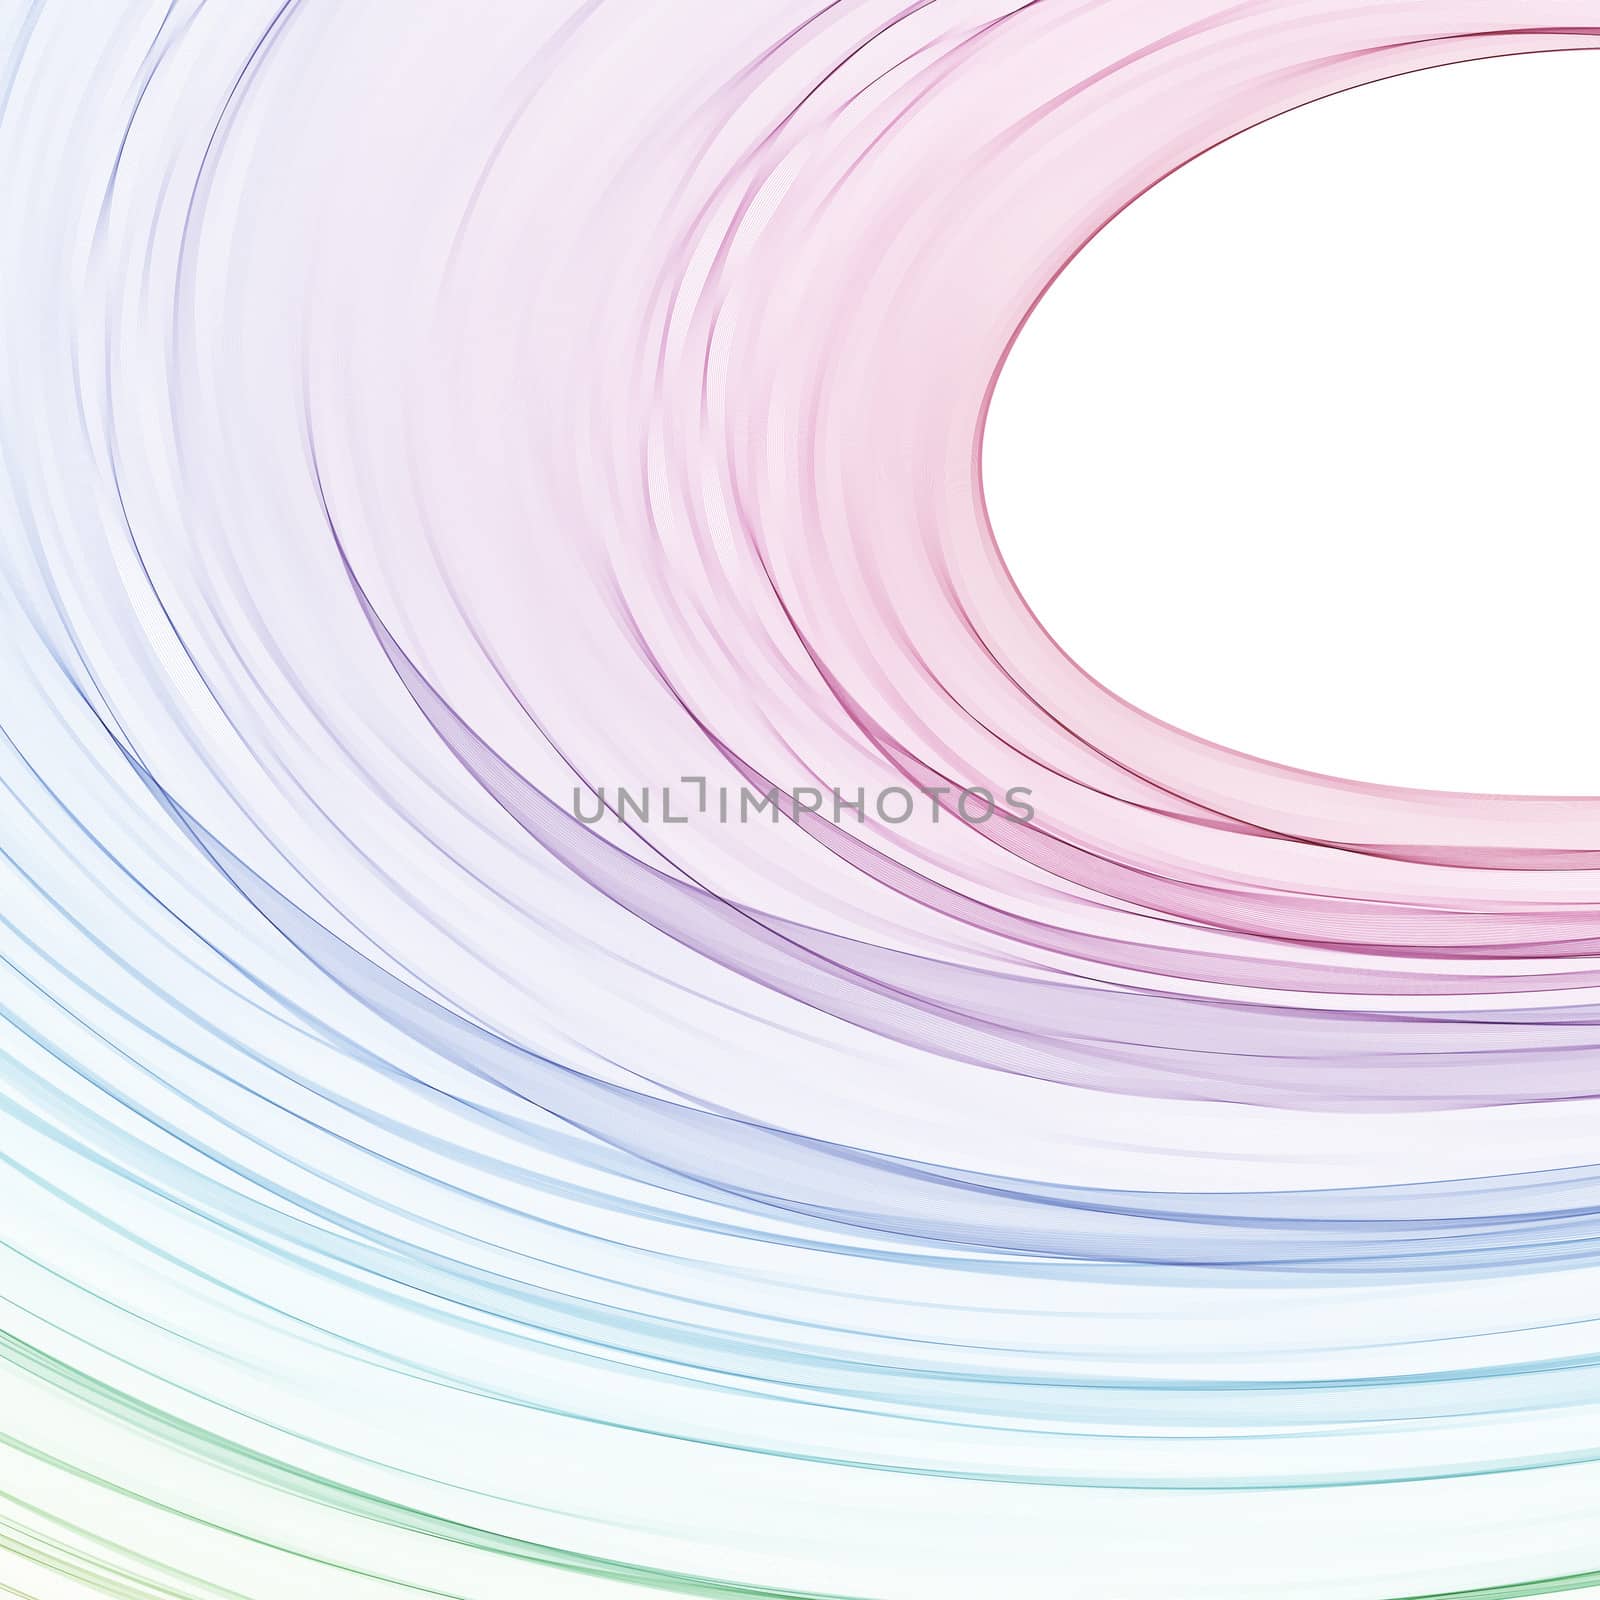 Multicolor Abstract Background for various design artworks